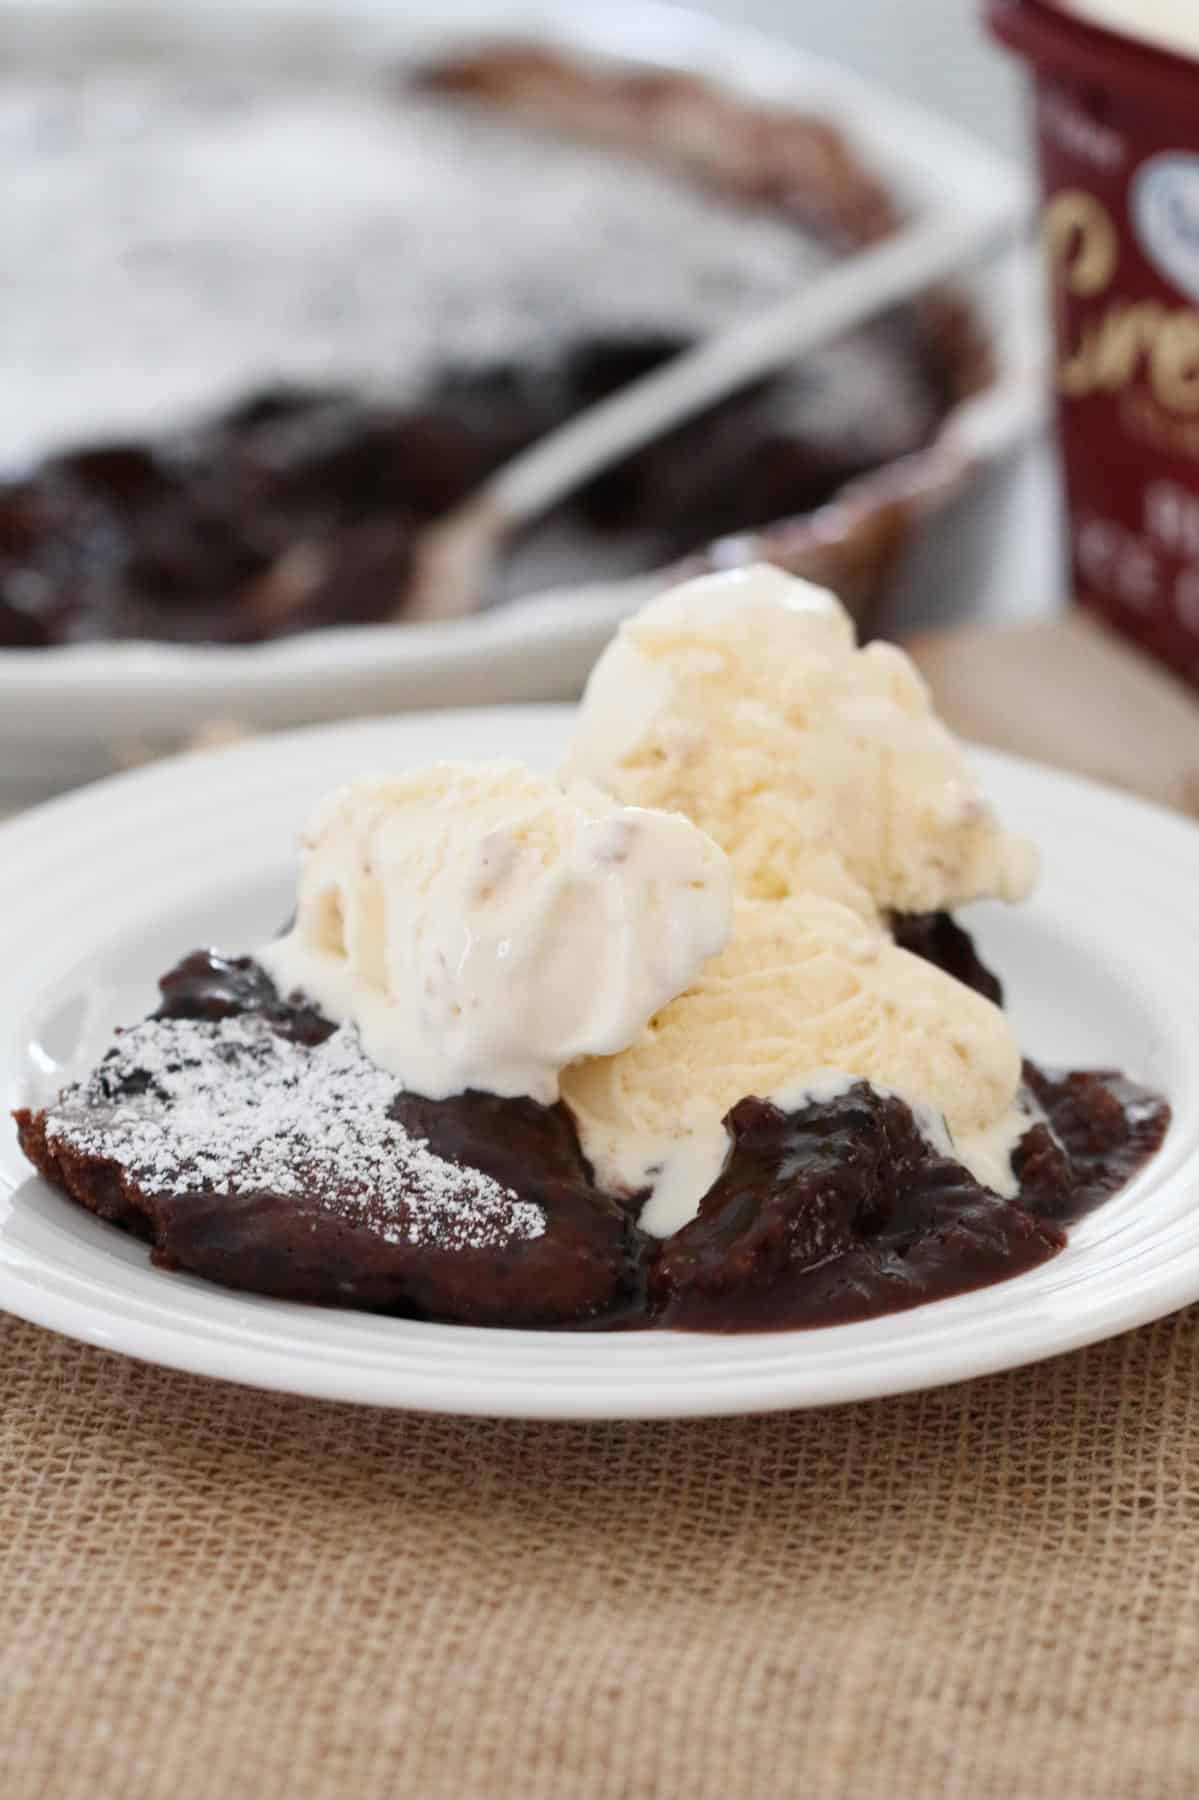 Chocolate self saucing pudding served with ice cream on a plate.